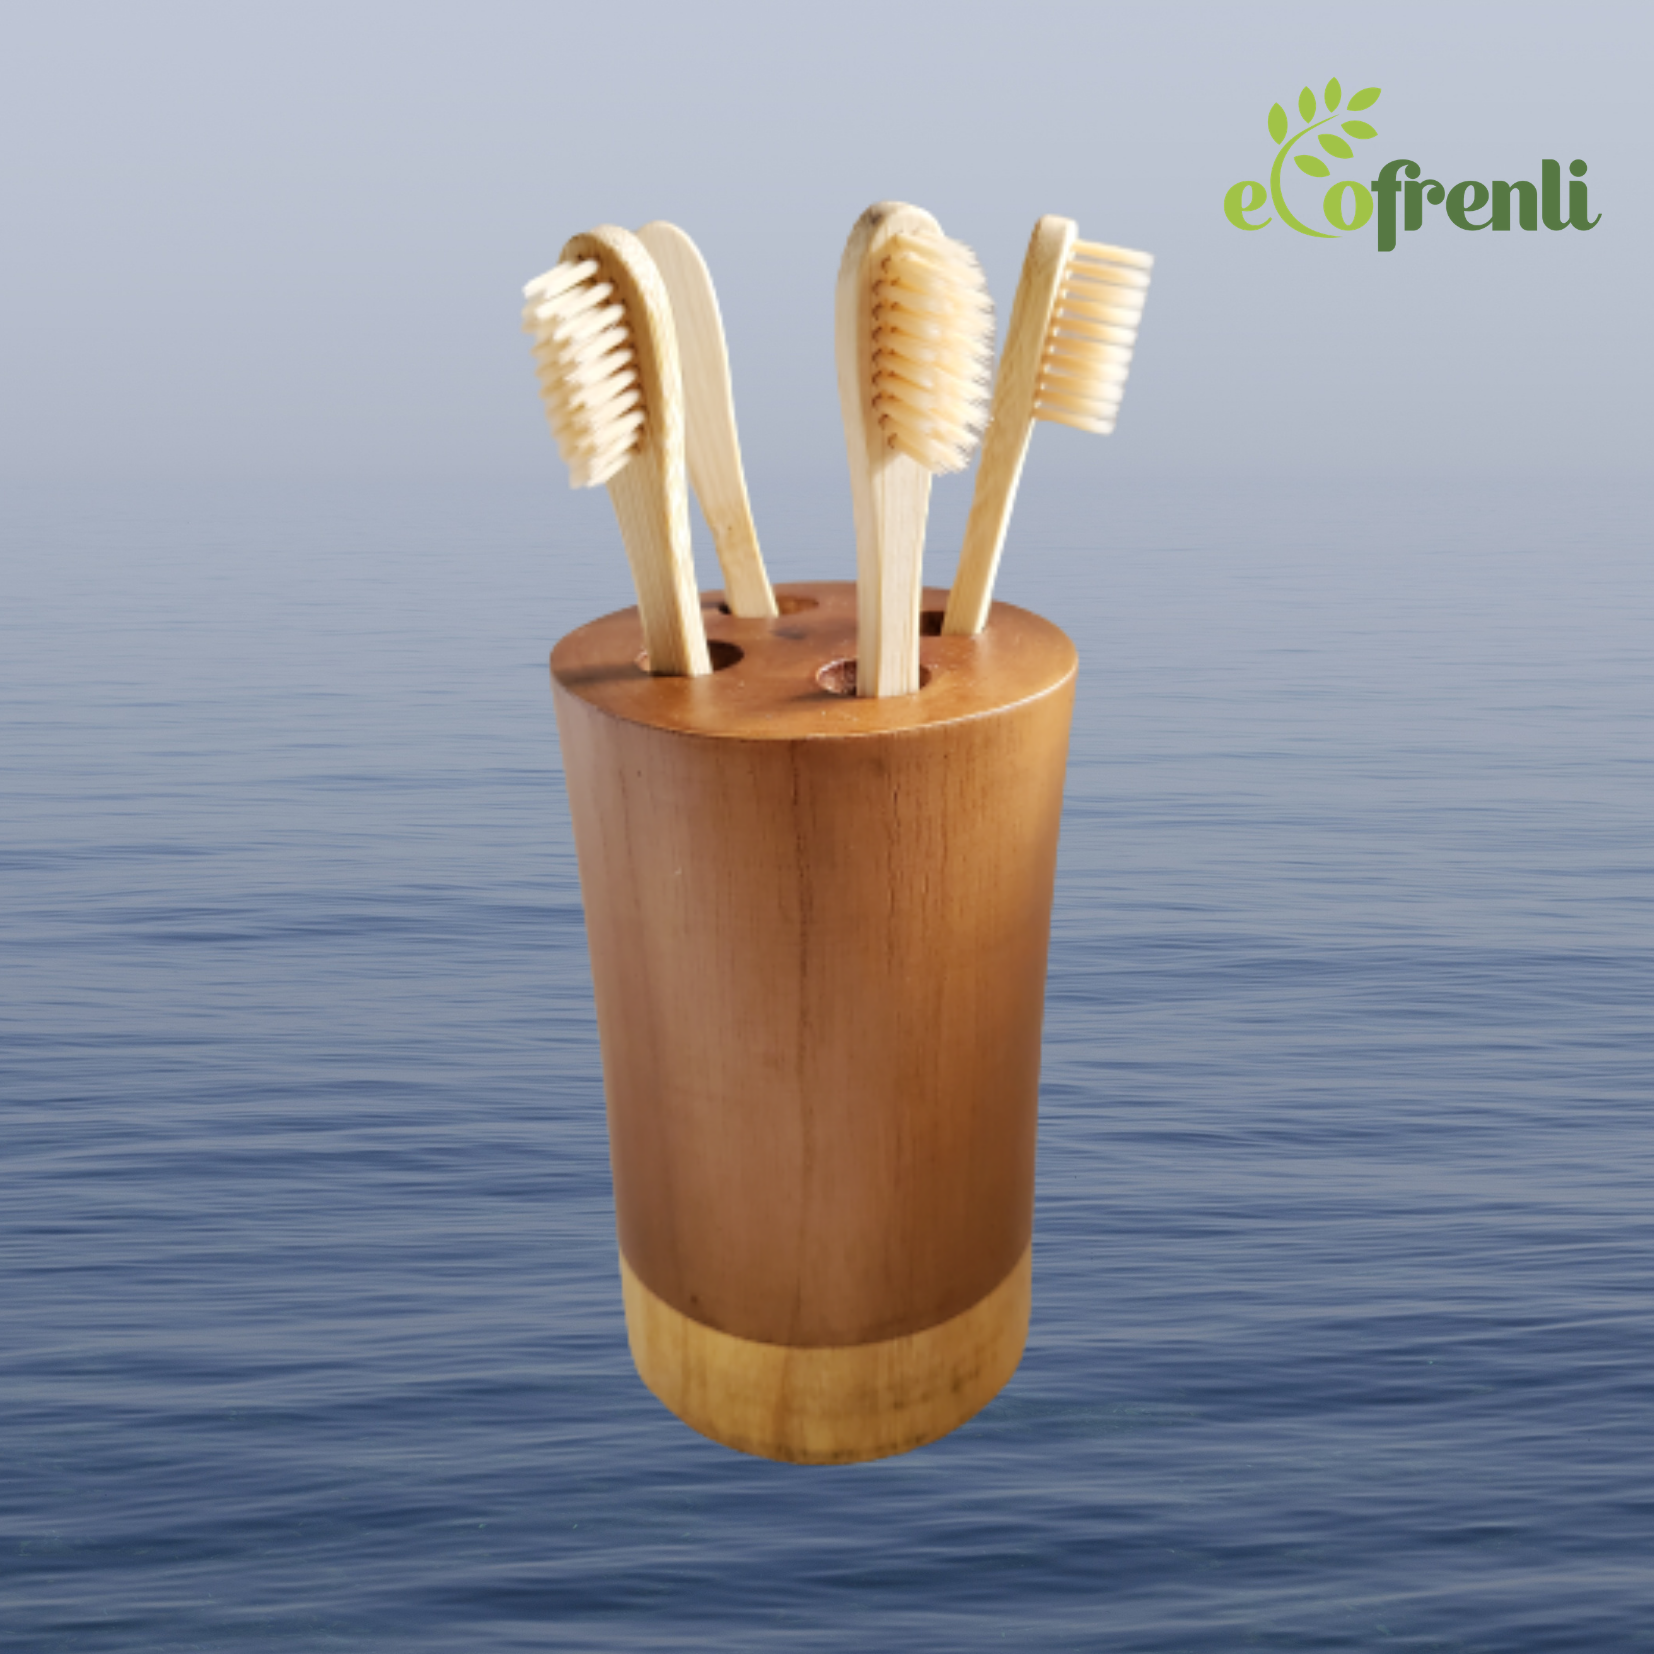 Family Toothbrush and Wooden Holder set - Ecofrenli.com